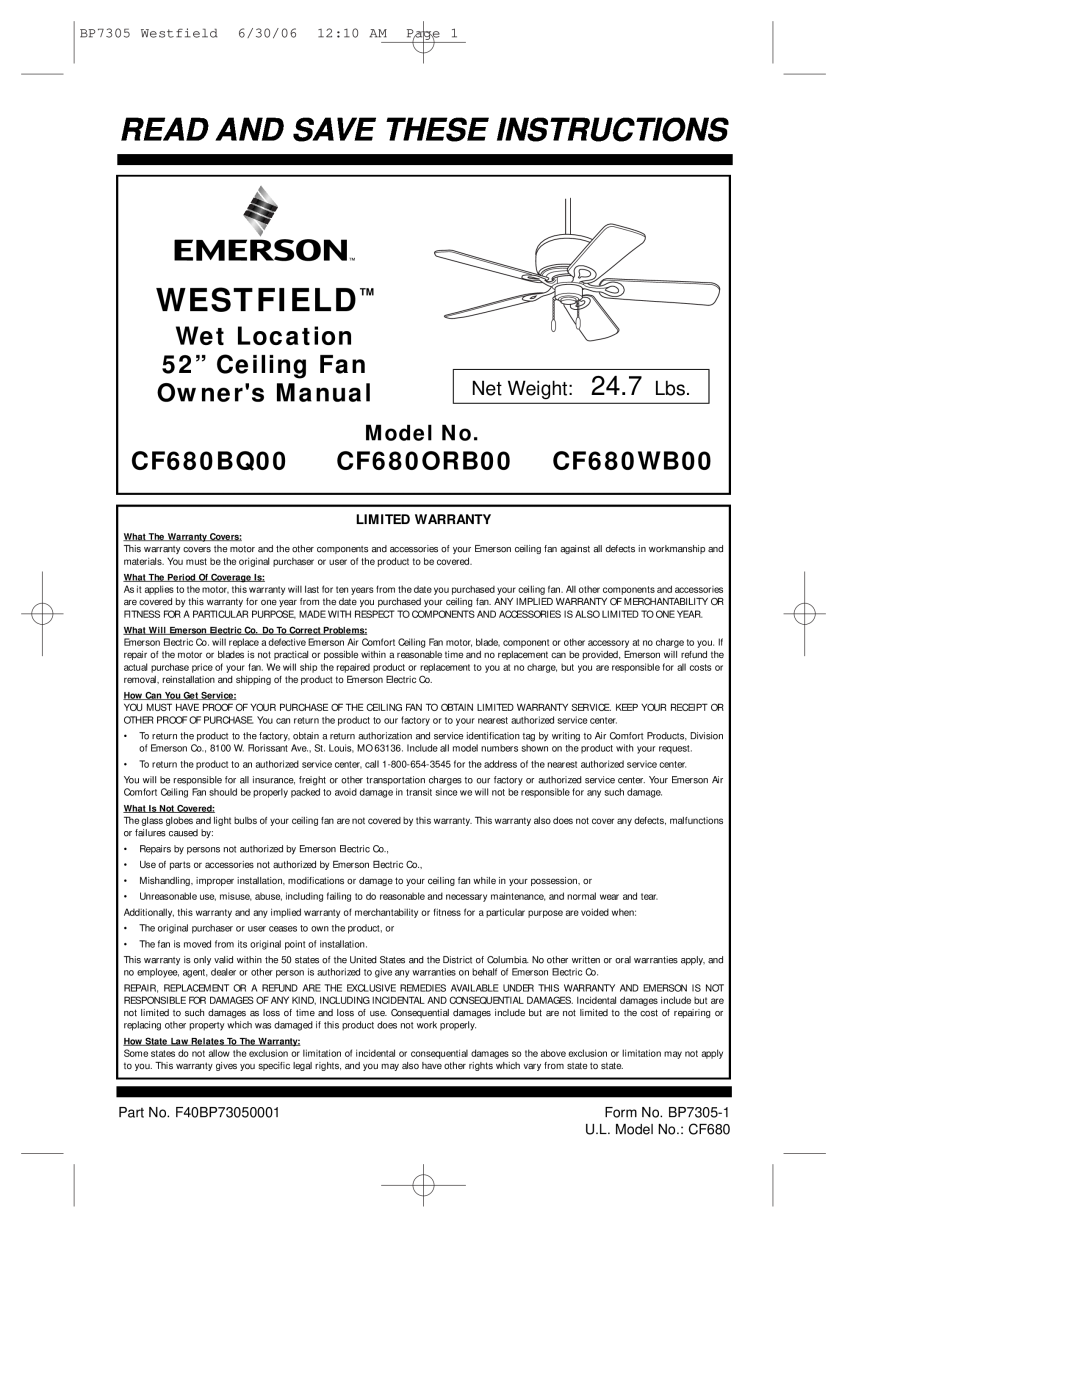 Emerson CF680ORB00 warranty Model No, Limited Warranty, Westfield, Read And Save These Instructions, Net Weight 24.7 Lbs 